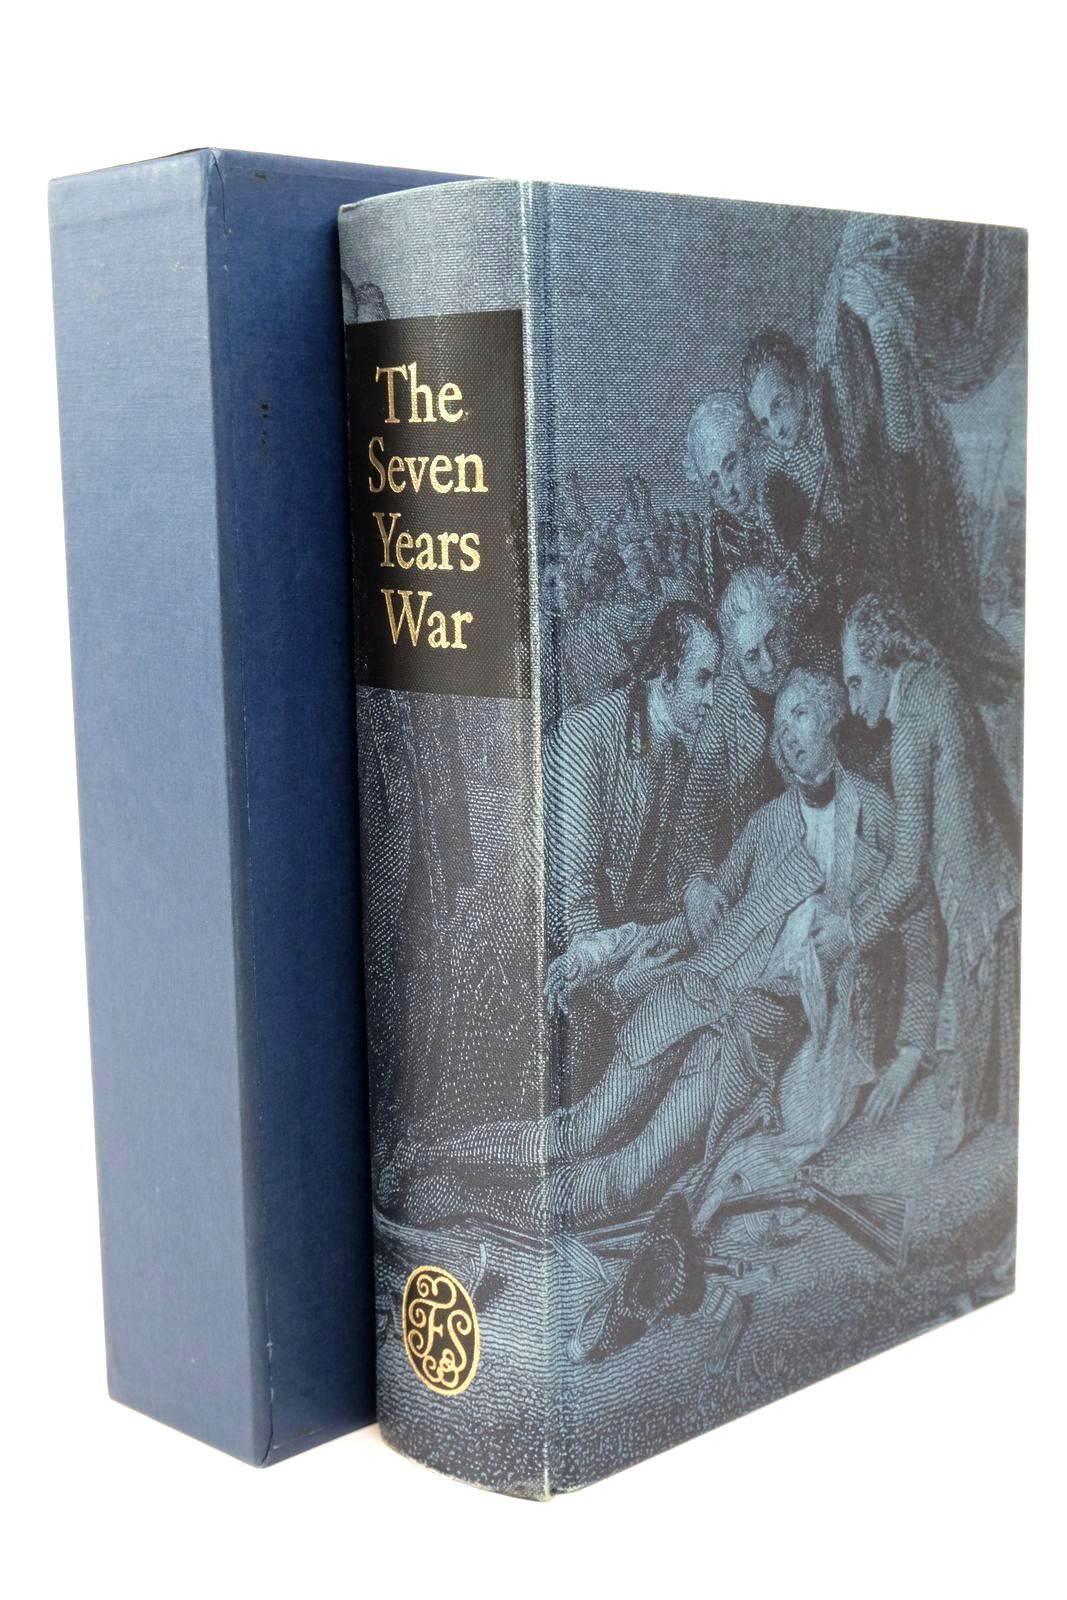 Photo of THE SEVEN YEARS WAR written by Corbett, Julian S. Black, Jeremy published by Folio Society (STOCK CODE: 1322508)  for sale by Stella & Rose's Books